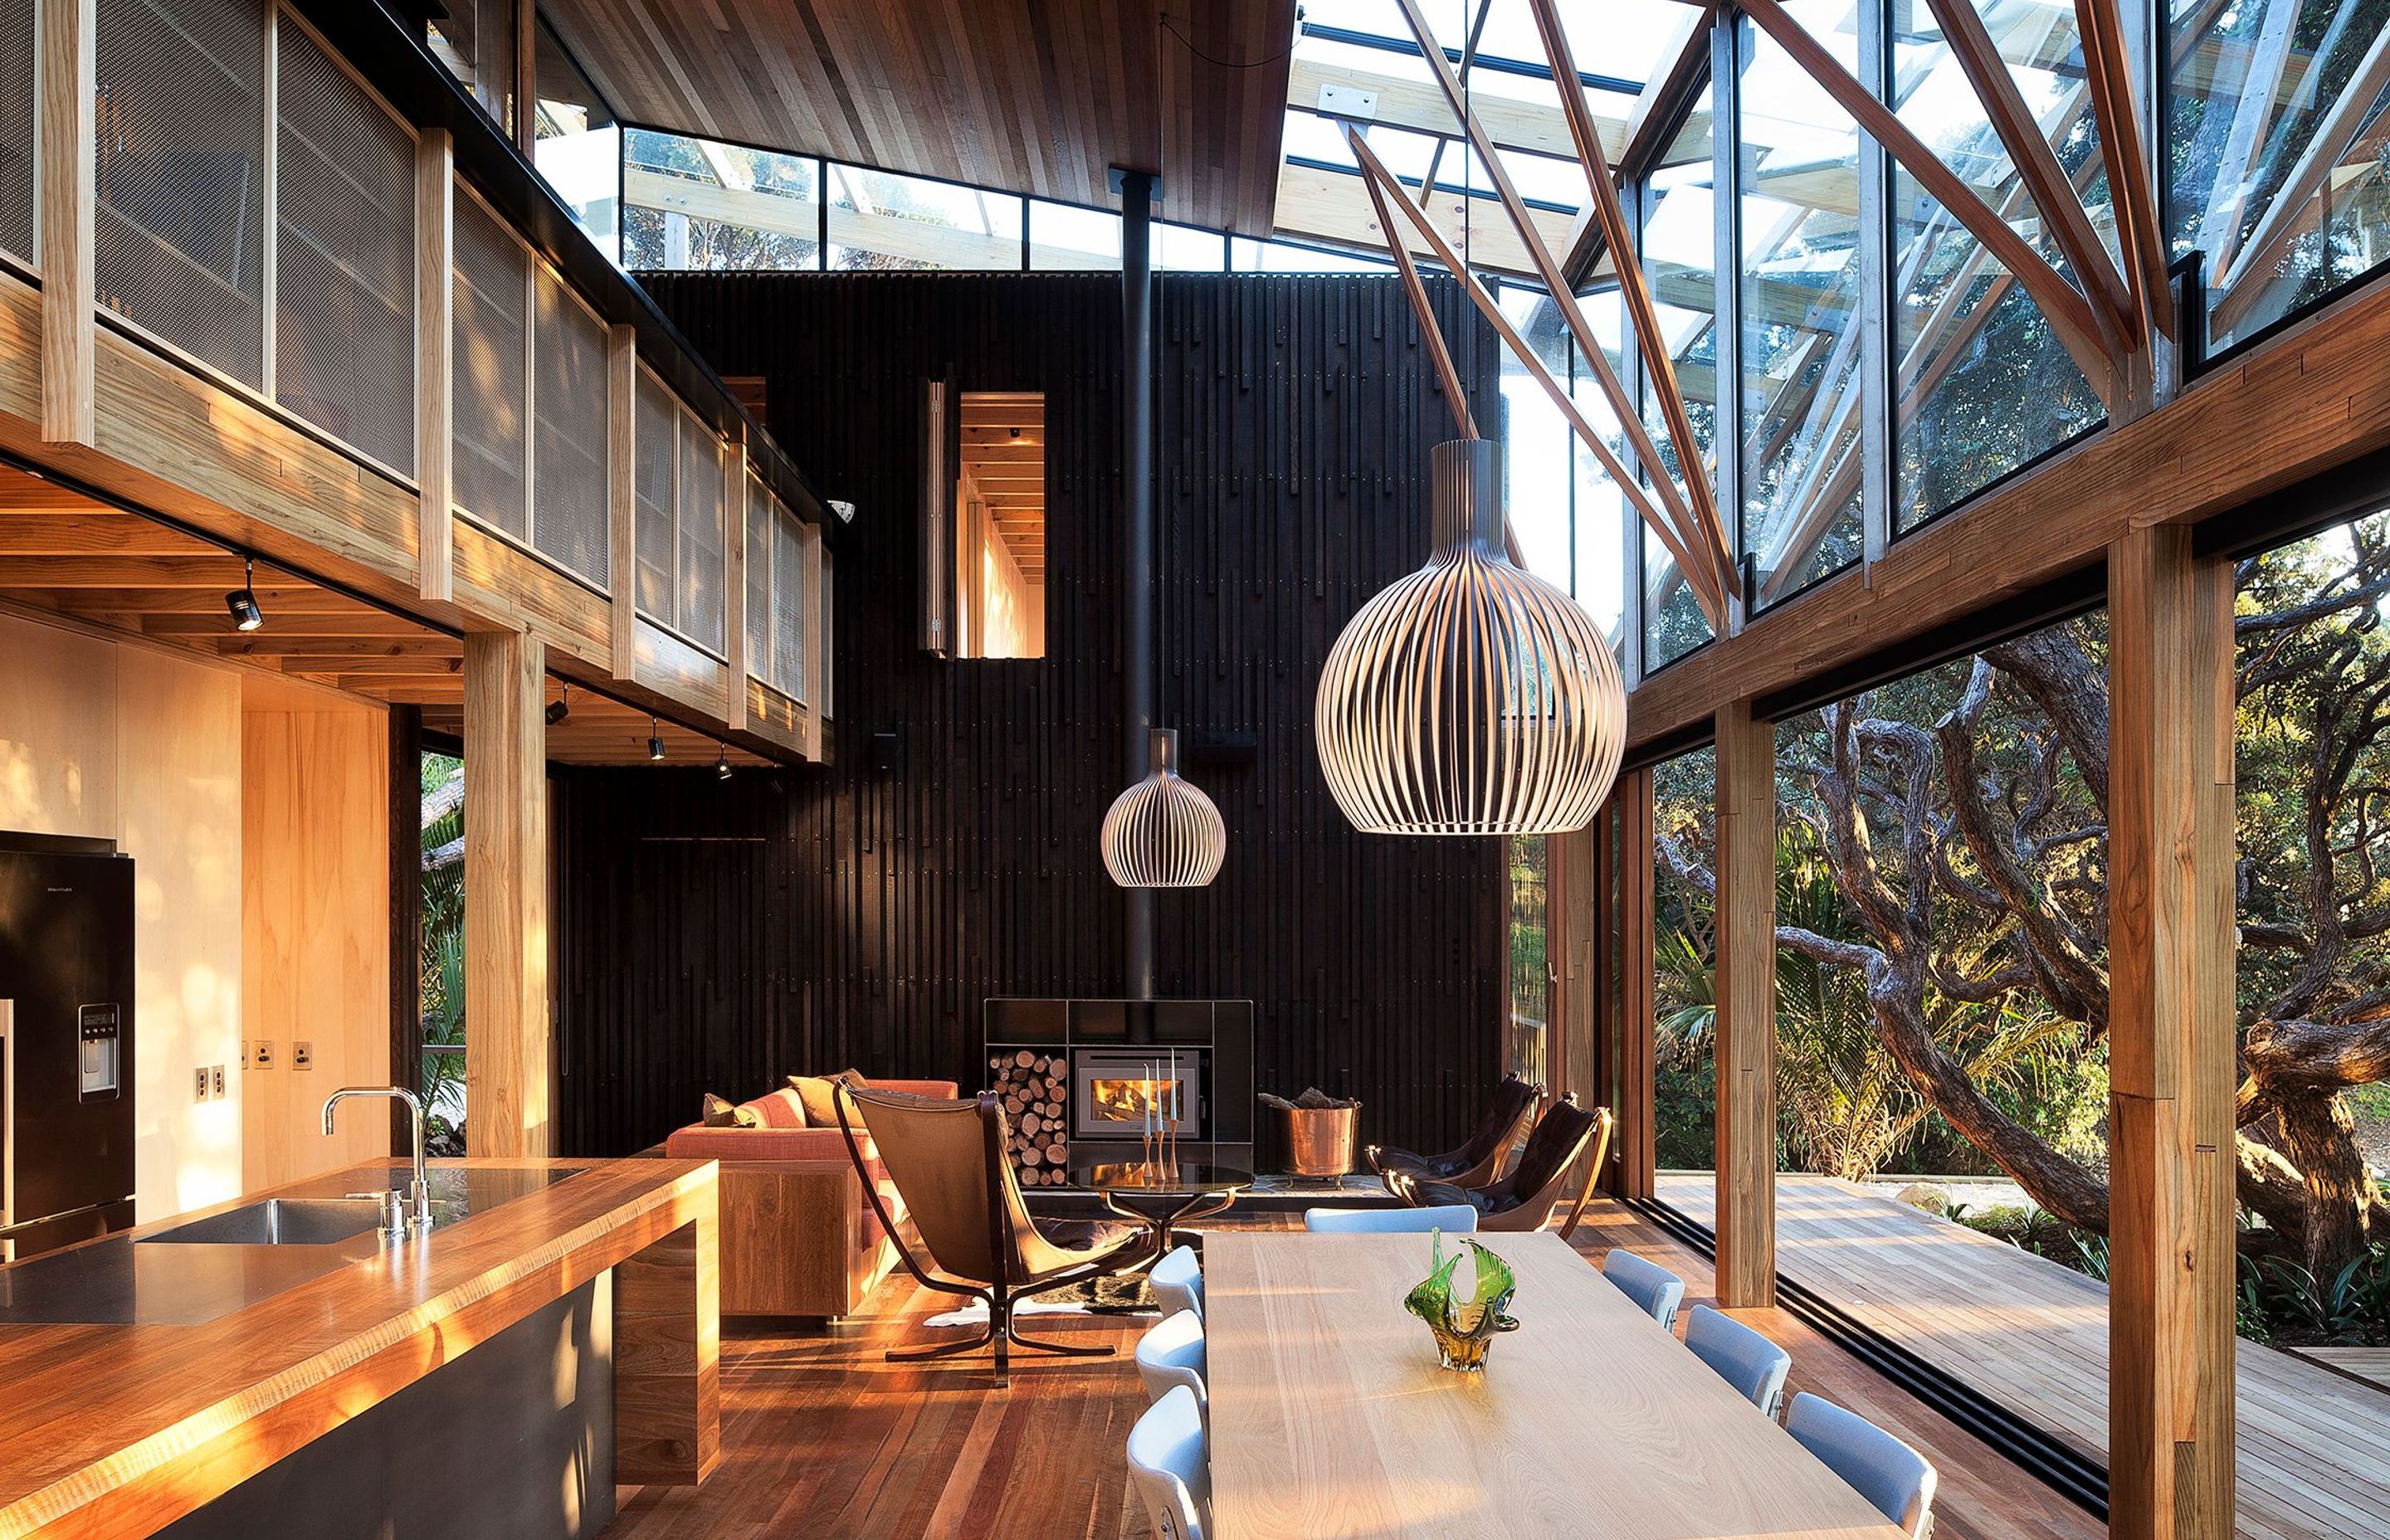 Herbst Architects’ Under Pohutukawa house (above and in the top banner image) is part of its setting through the layering and expression of timbers, structure and space. Photograph by Patrick Reynolds.